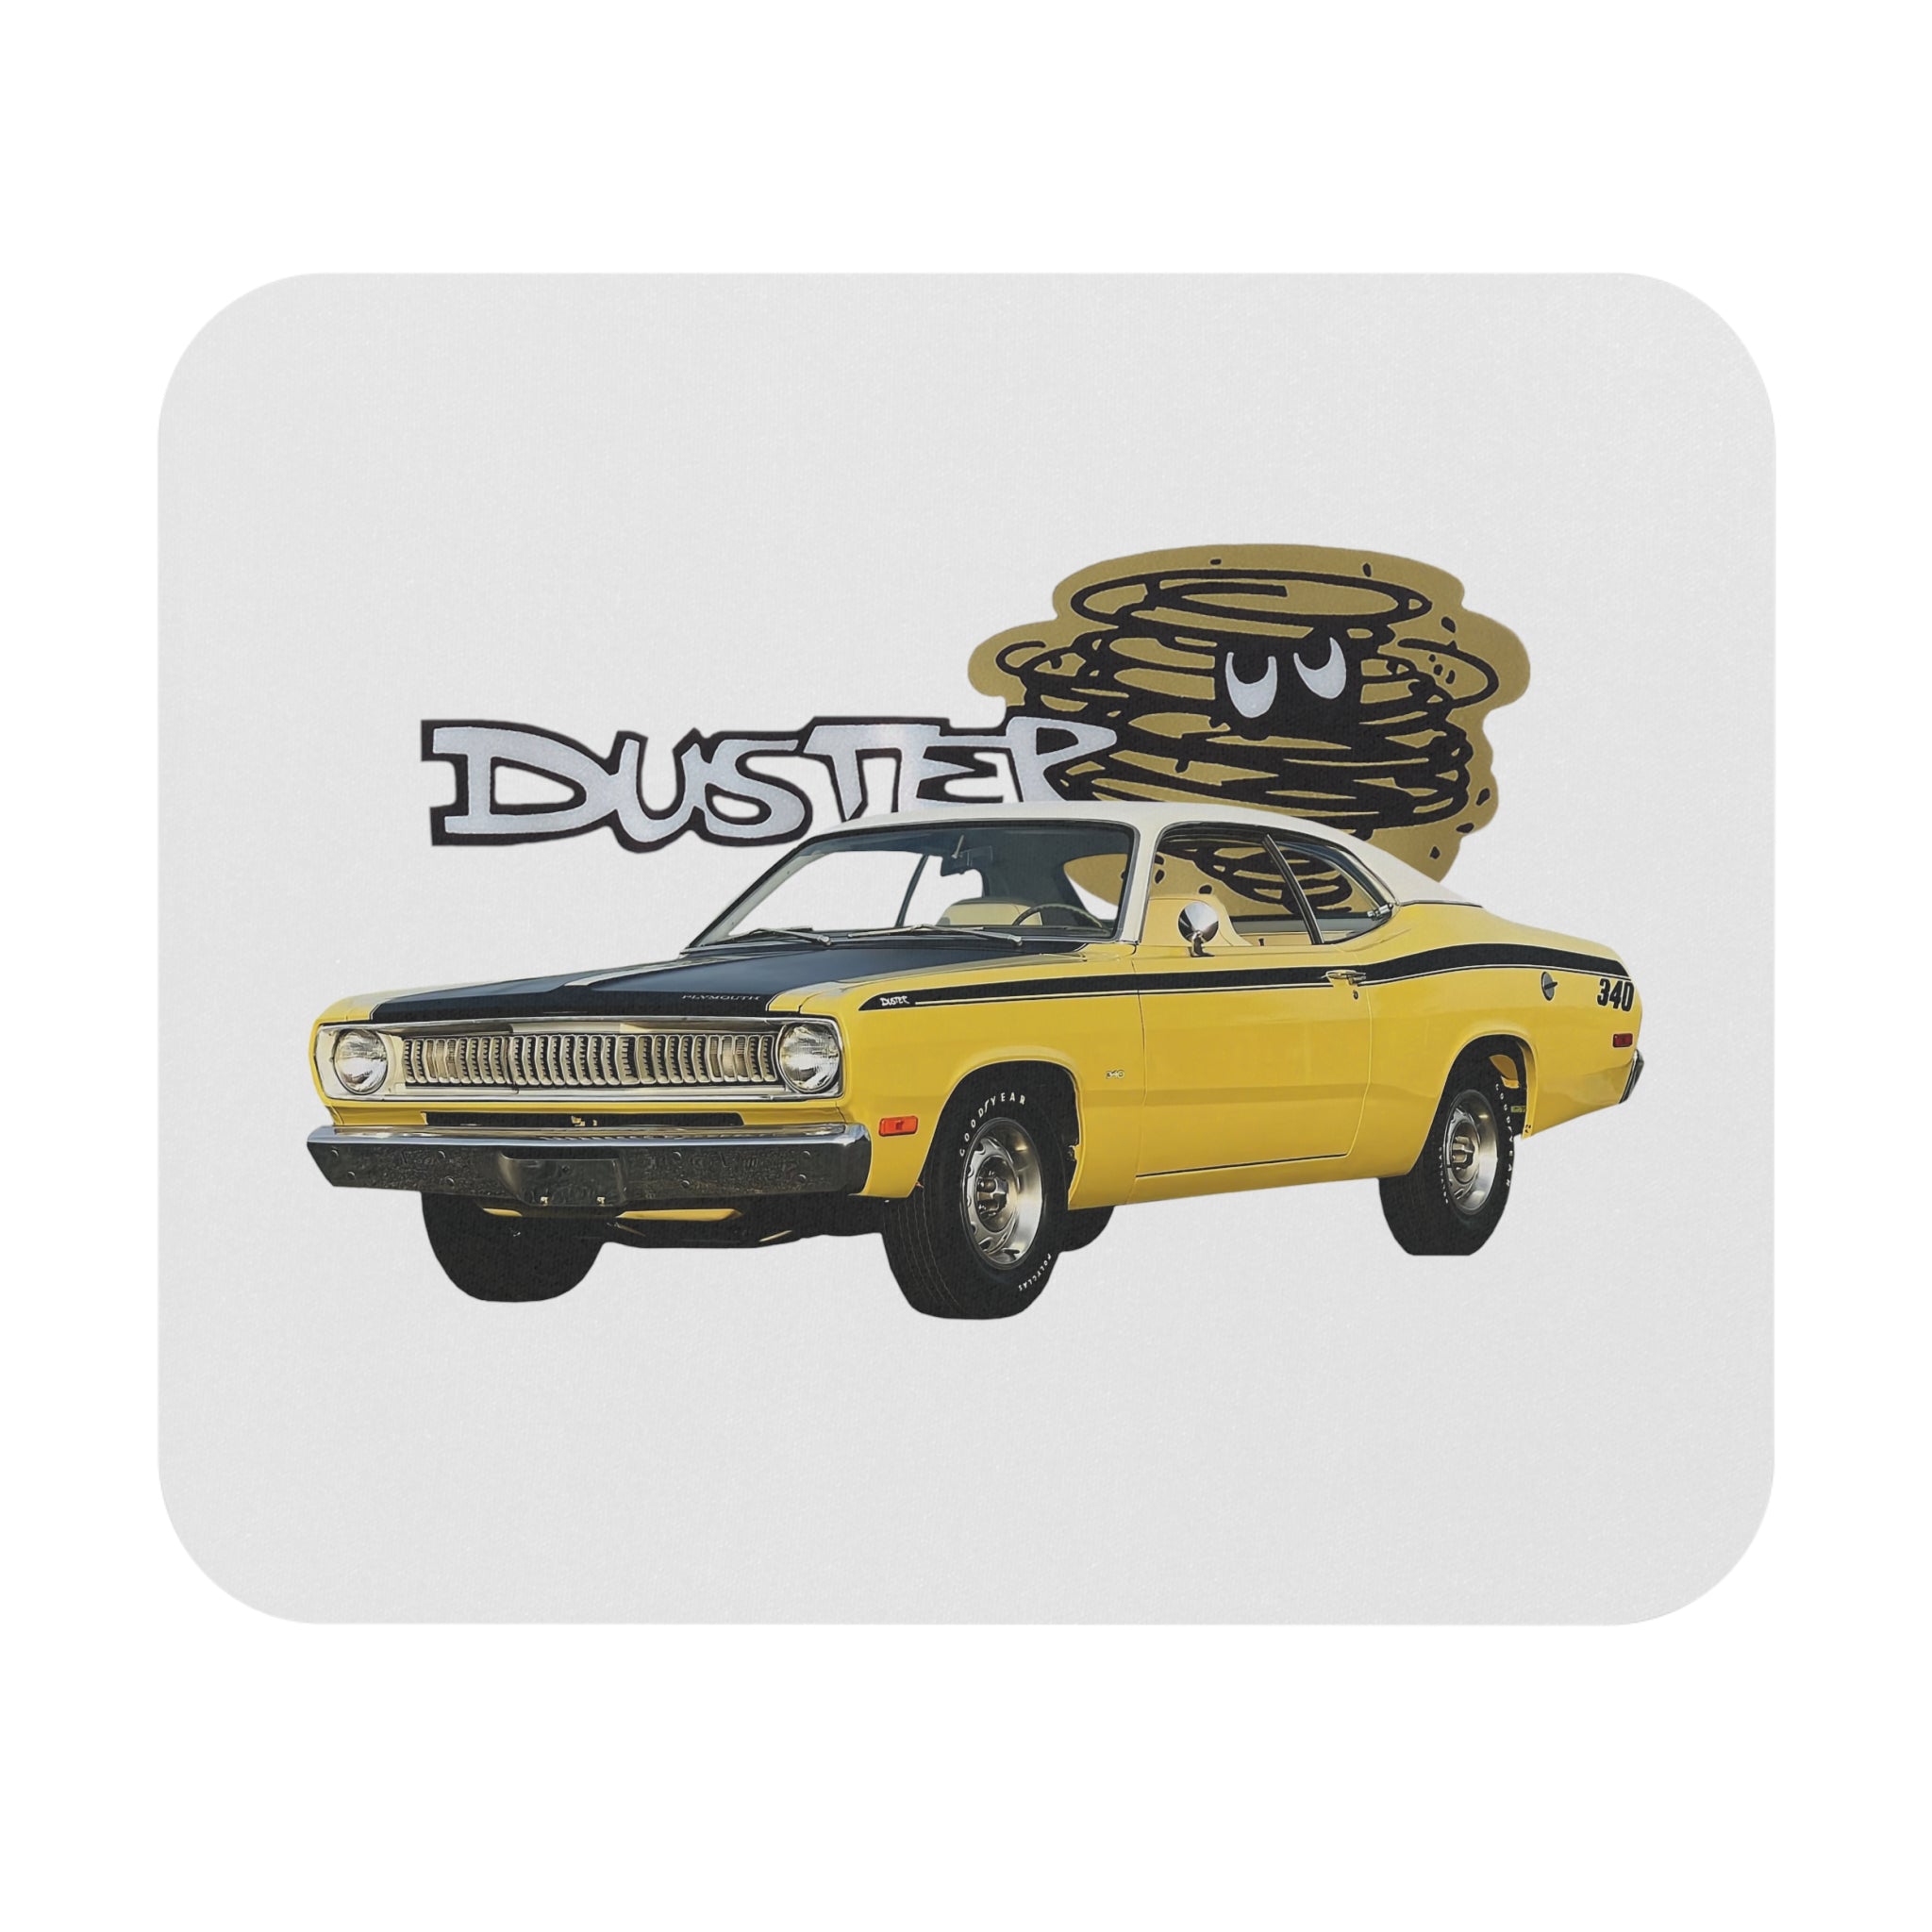 1972 Duster Mouse pad